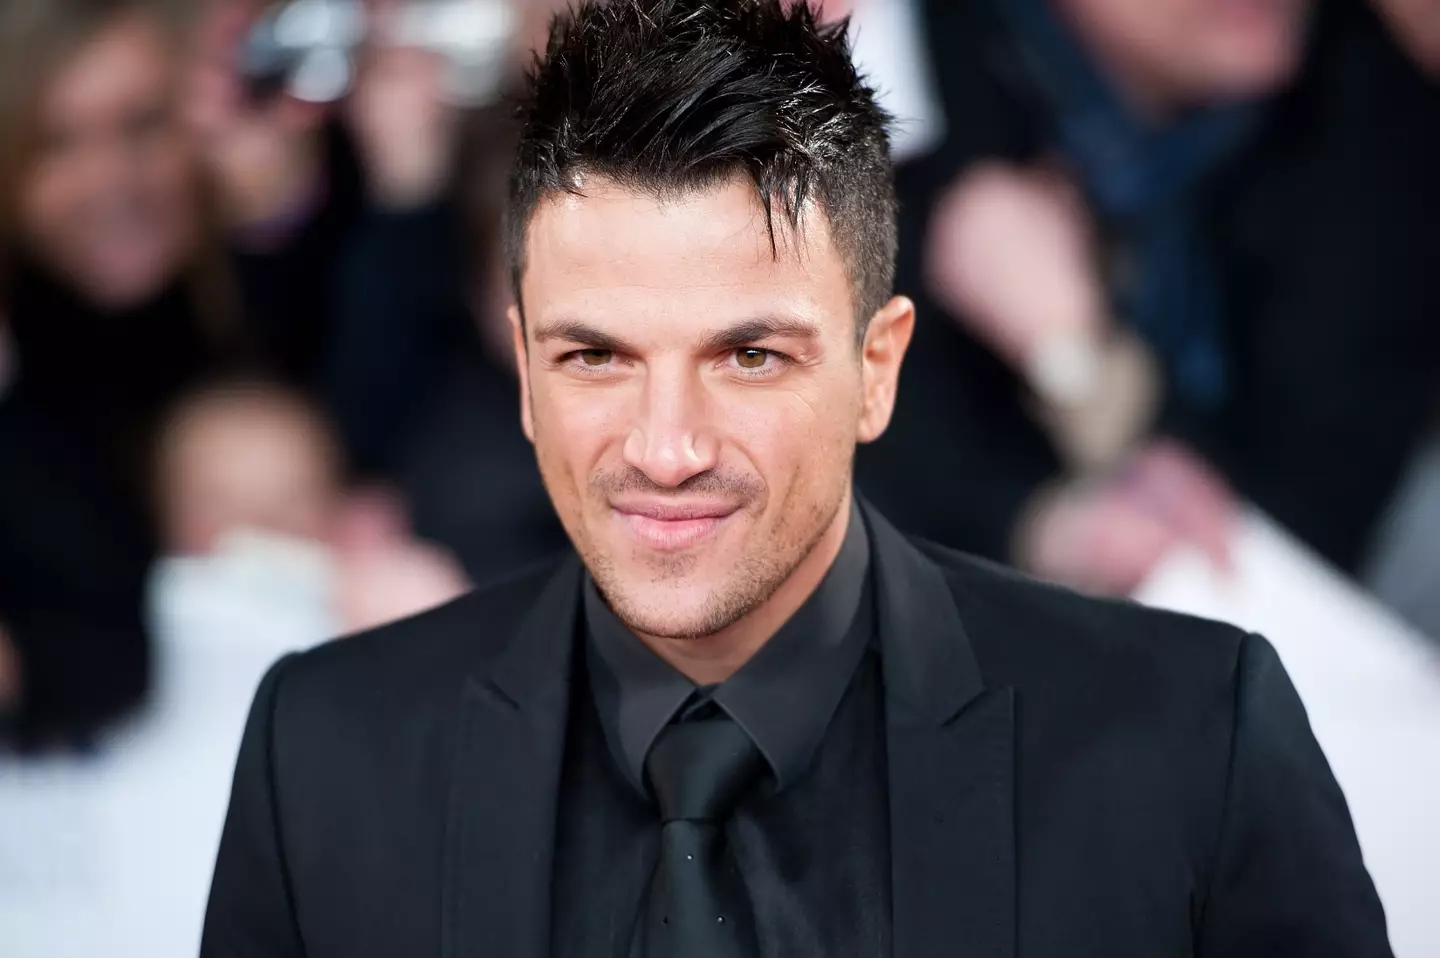 Peter Andre has defended the unusual name.